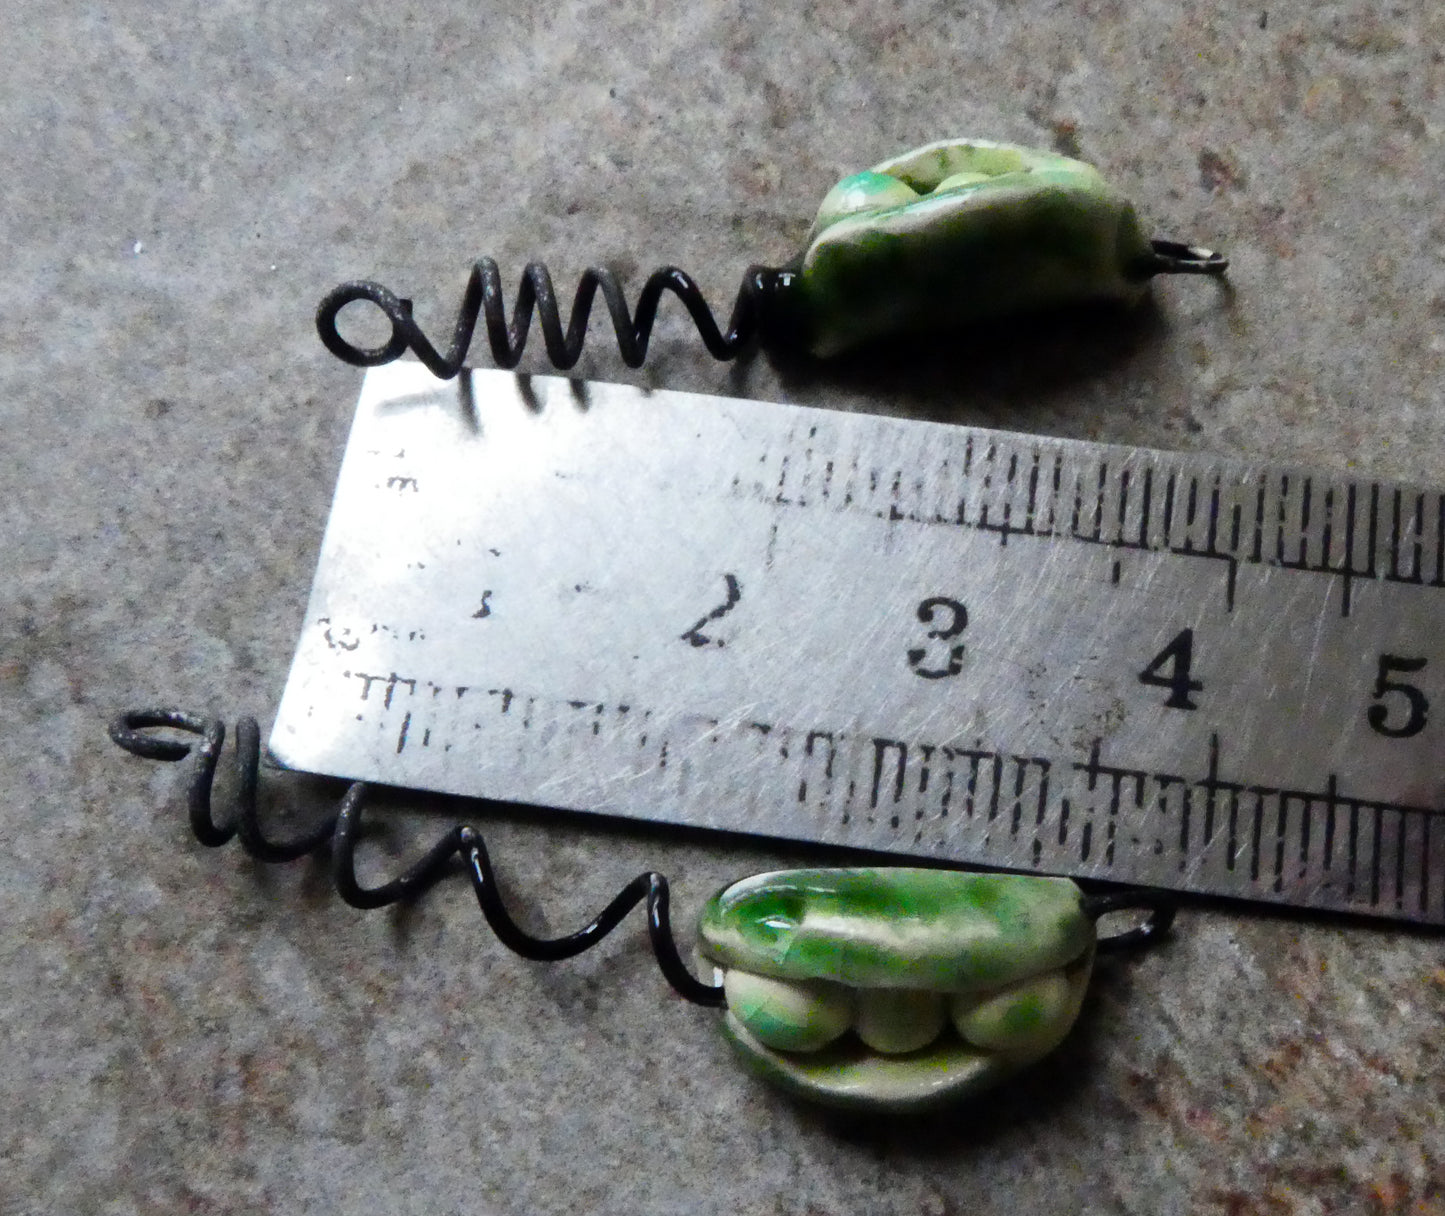 Ceramic Peapod and Tendril Earring Charms